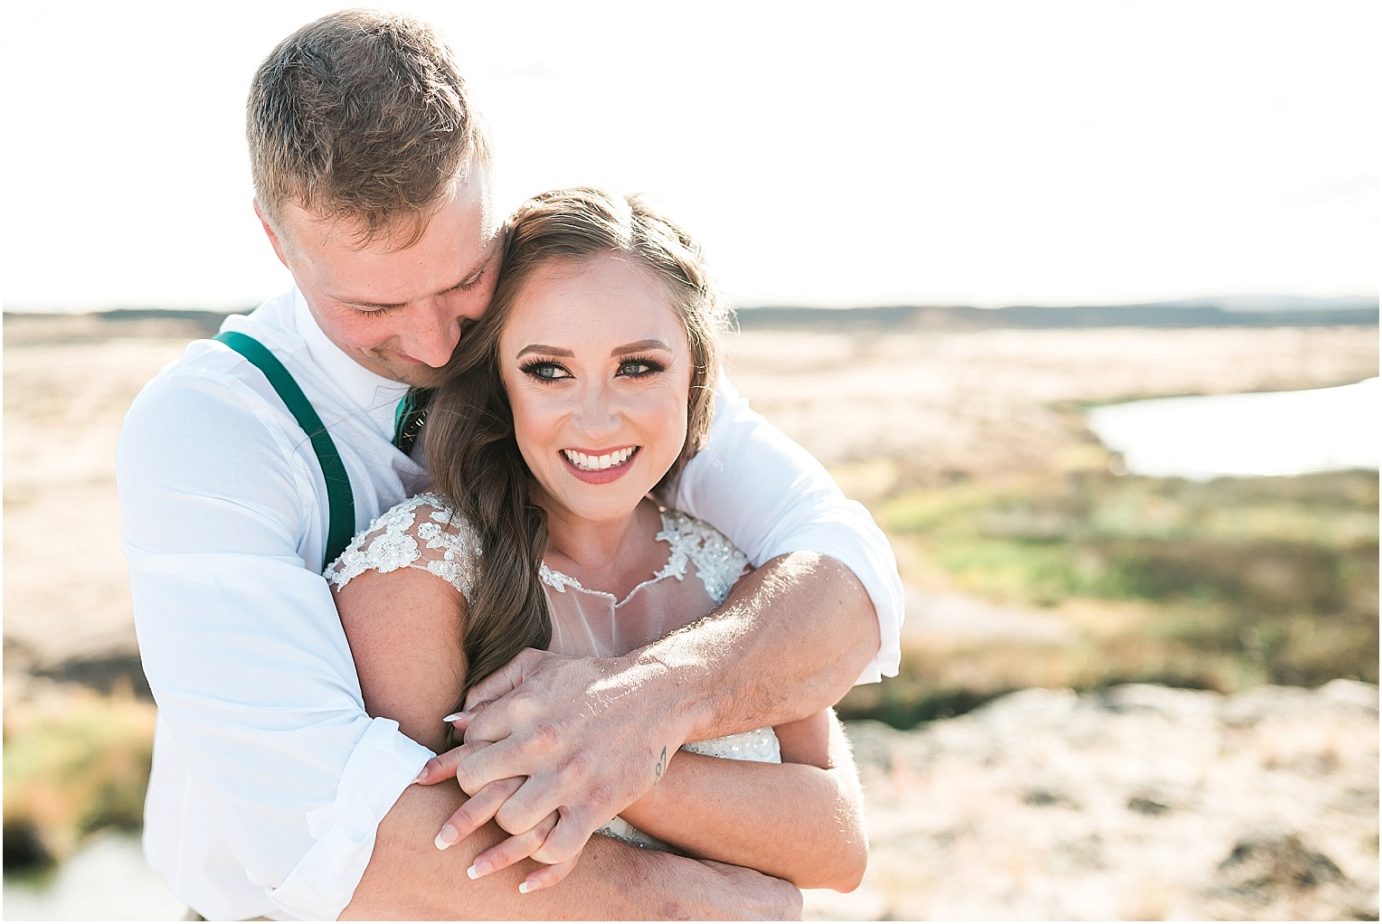 Beautiful Country Wedding Bryce and Anita Othello Photographer bride and groom portraits